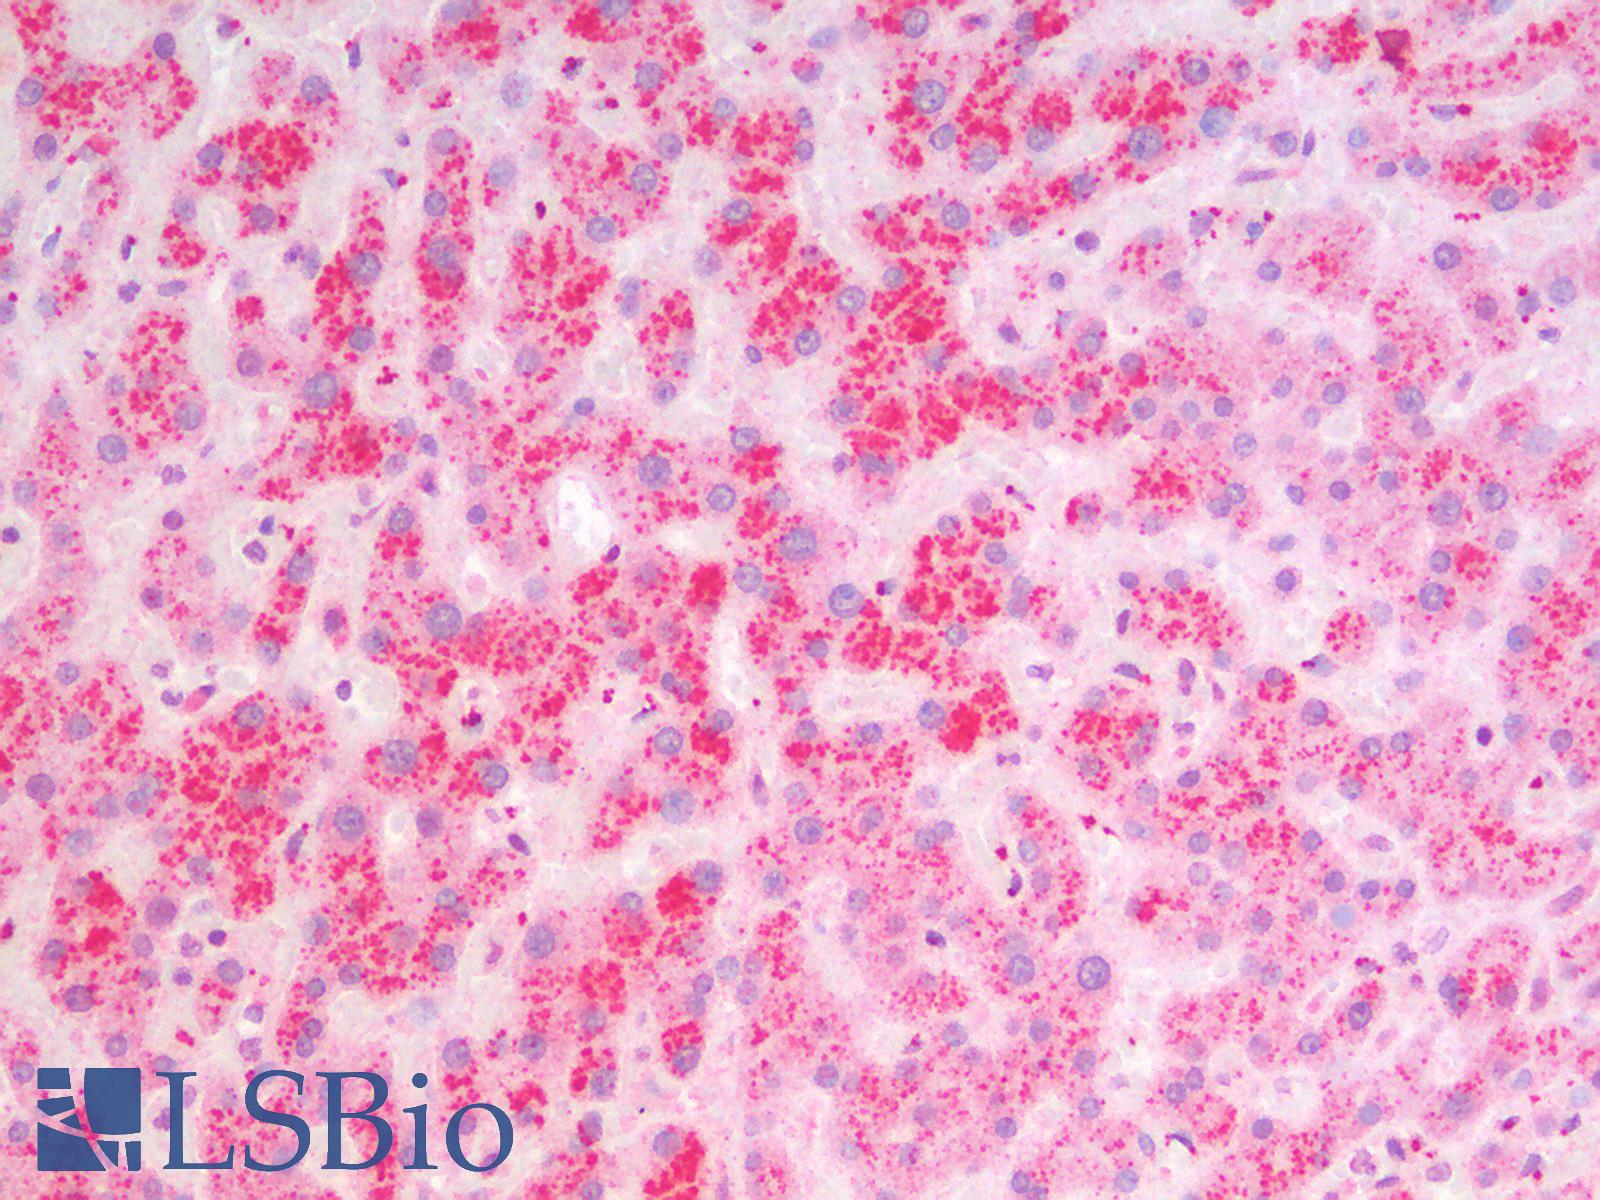 MSI2 Antibody - Human Liver: Formalin-Fixed, Paraffin-Embedded (FFPE)